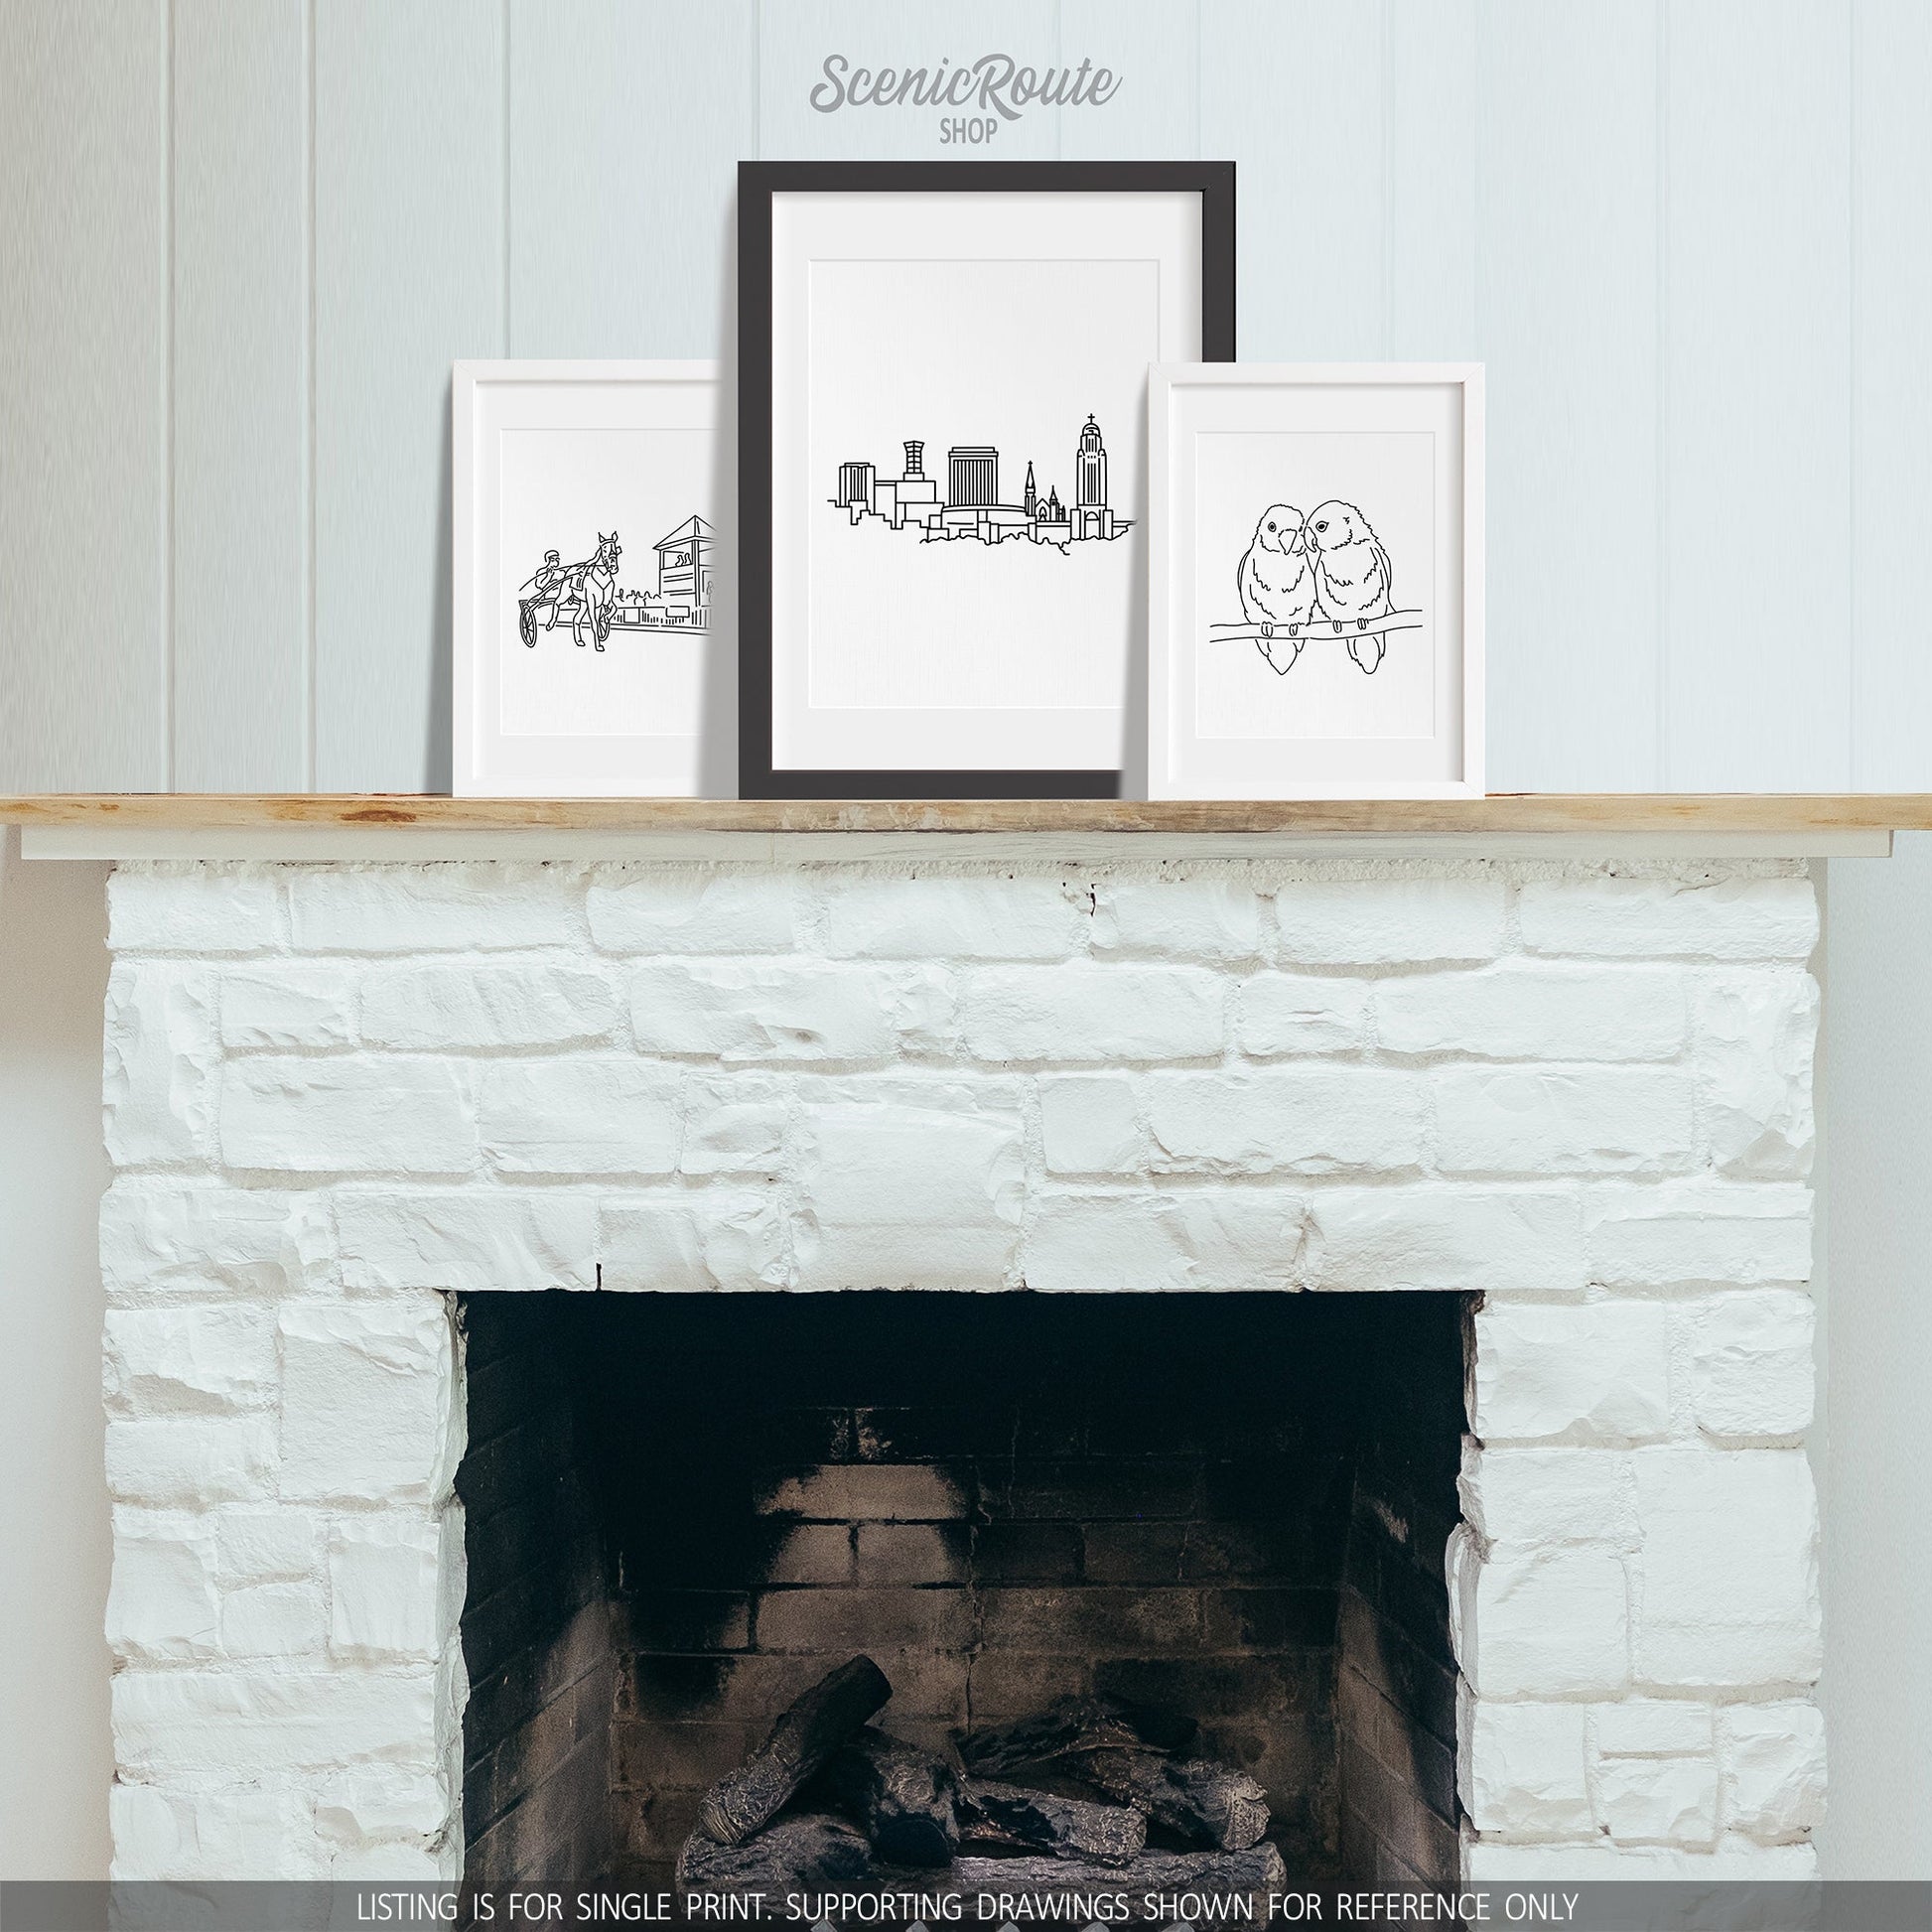 A group of three framed drawings on a fireplace mantle. The line art drawings include Harness Racing, Lincoln Skyline, and Love Birds